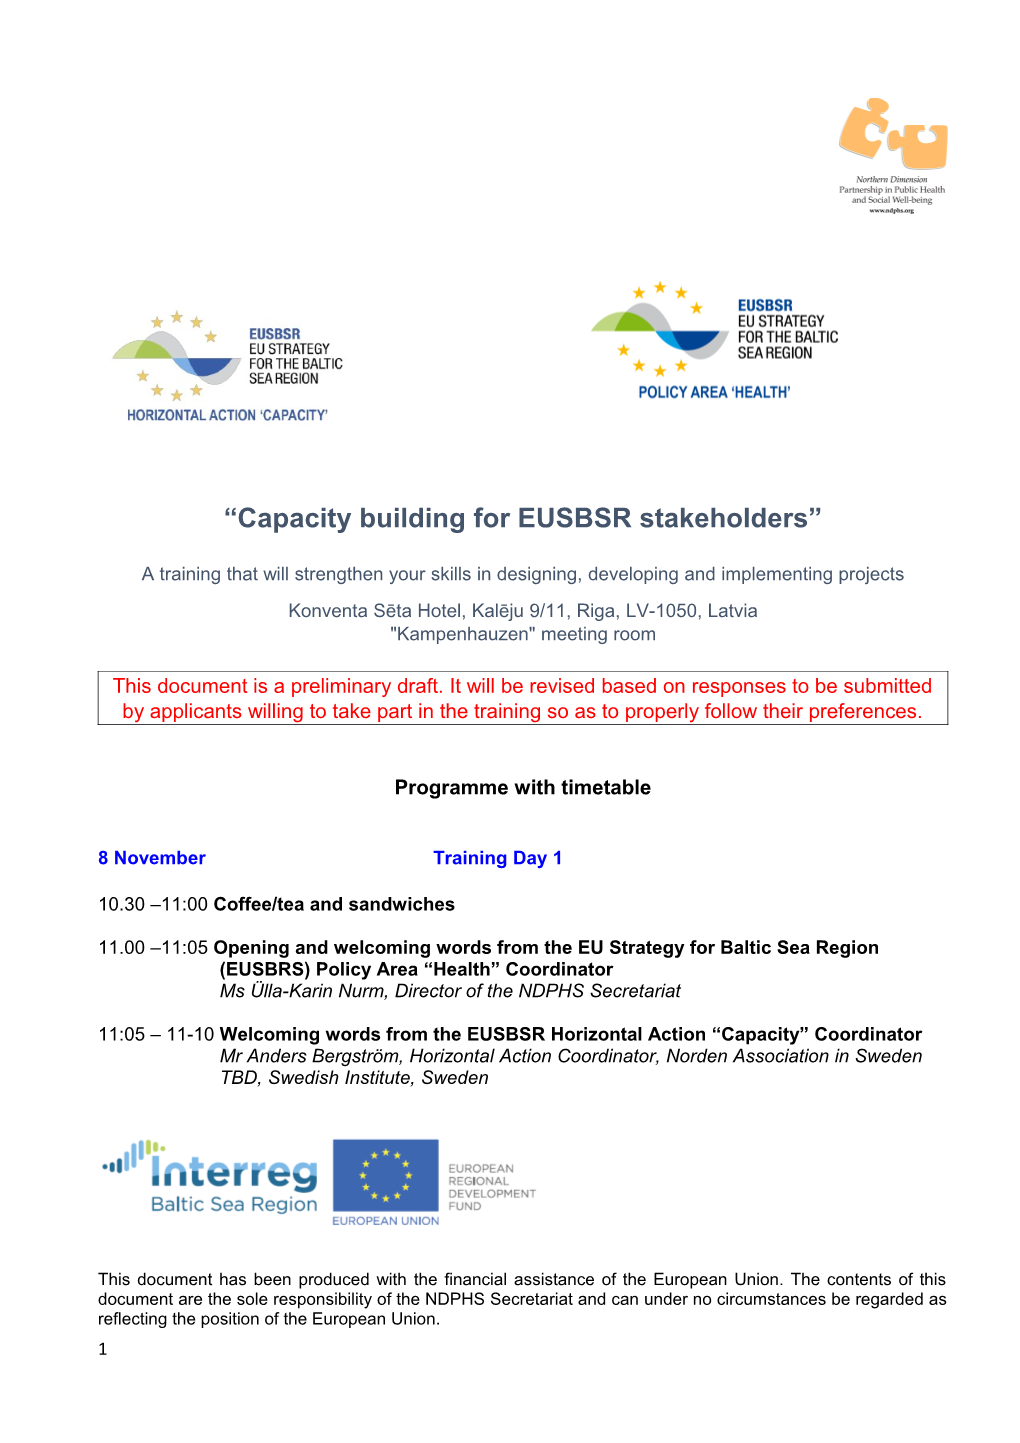 Capacity Building for EUSBSR Stakeholders